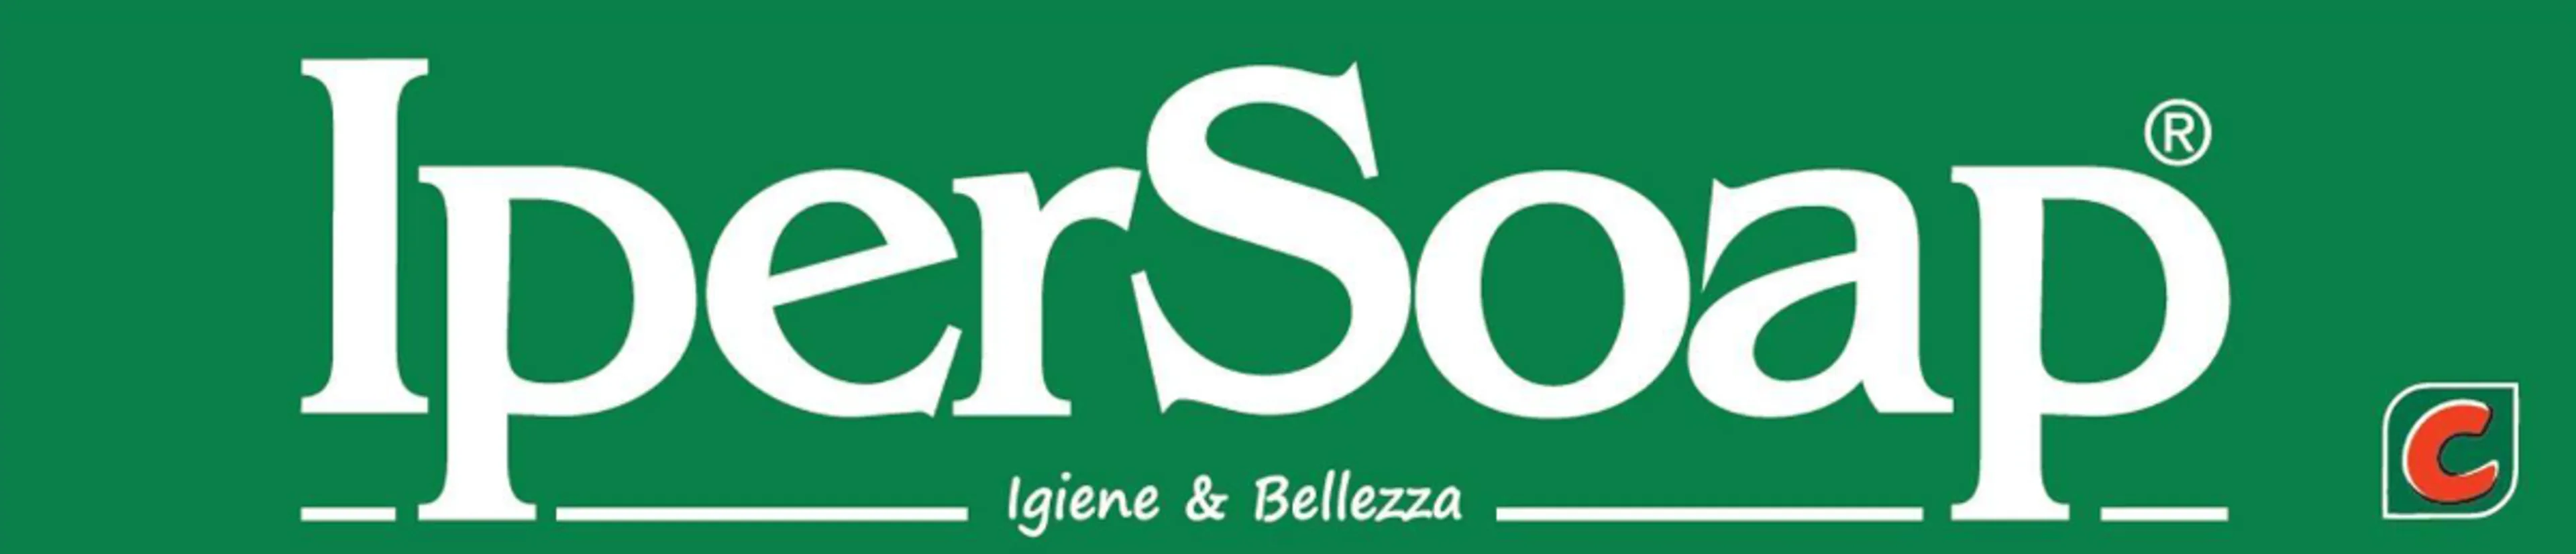 IPERSOAP logo